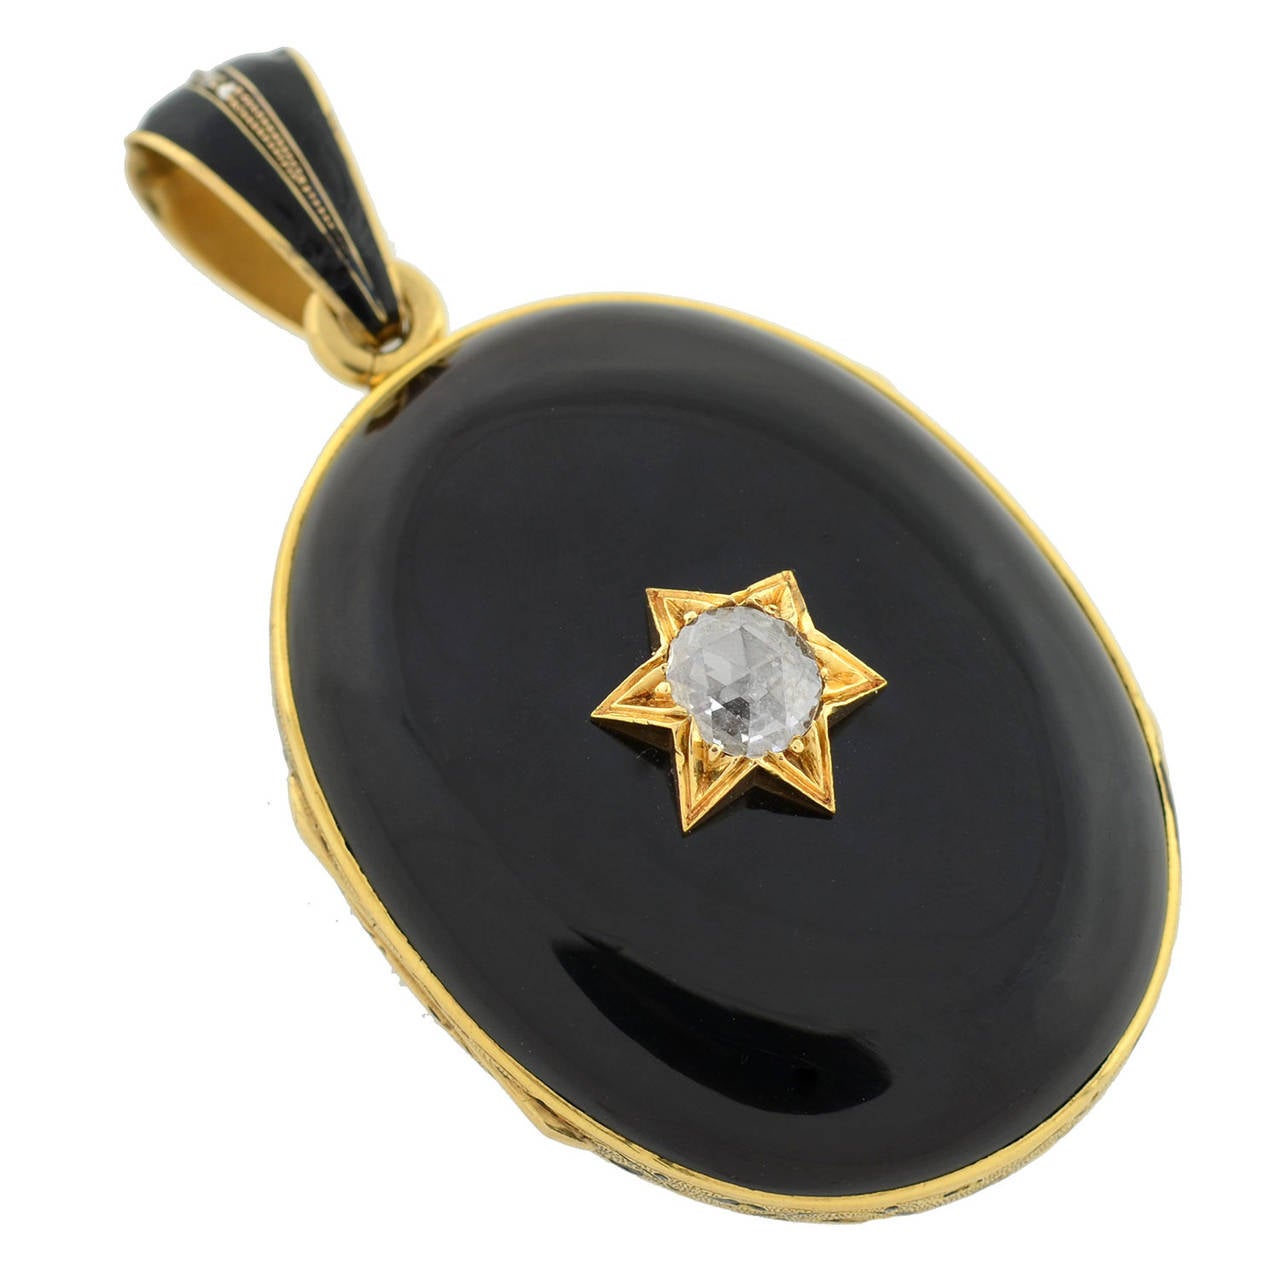 An outstanding enamel and diamond locket from the Victorian (ca1880) era! This incredible oval-shaped piece is made of 15kt yellow gold and is particularly large in size. Both sides of the locket are made of rich banded agate which is smoothly